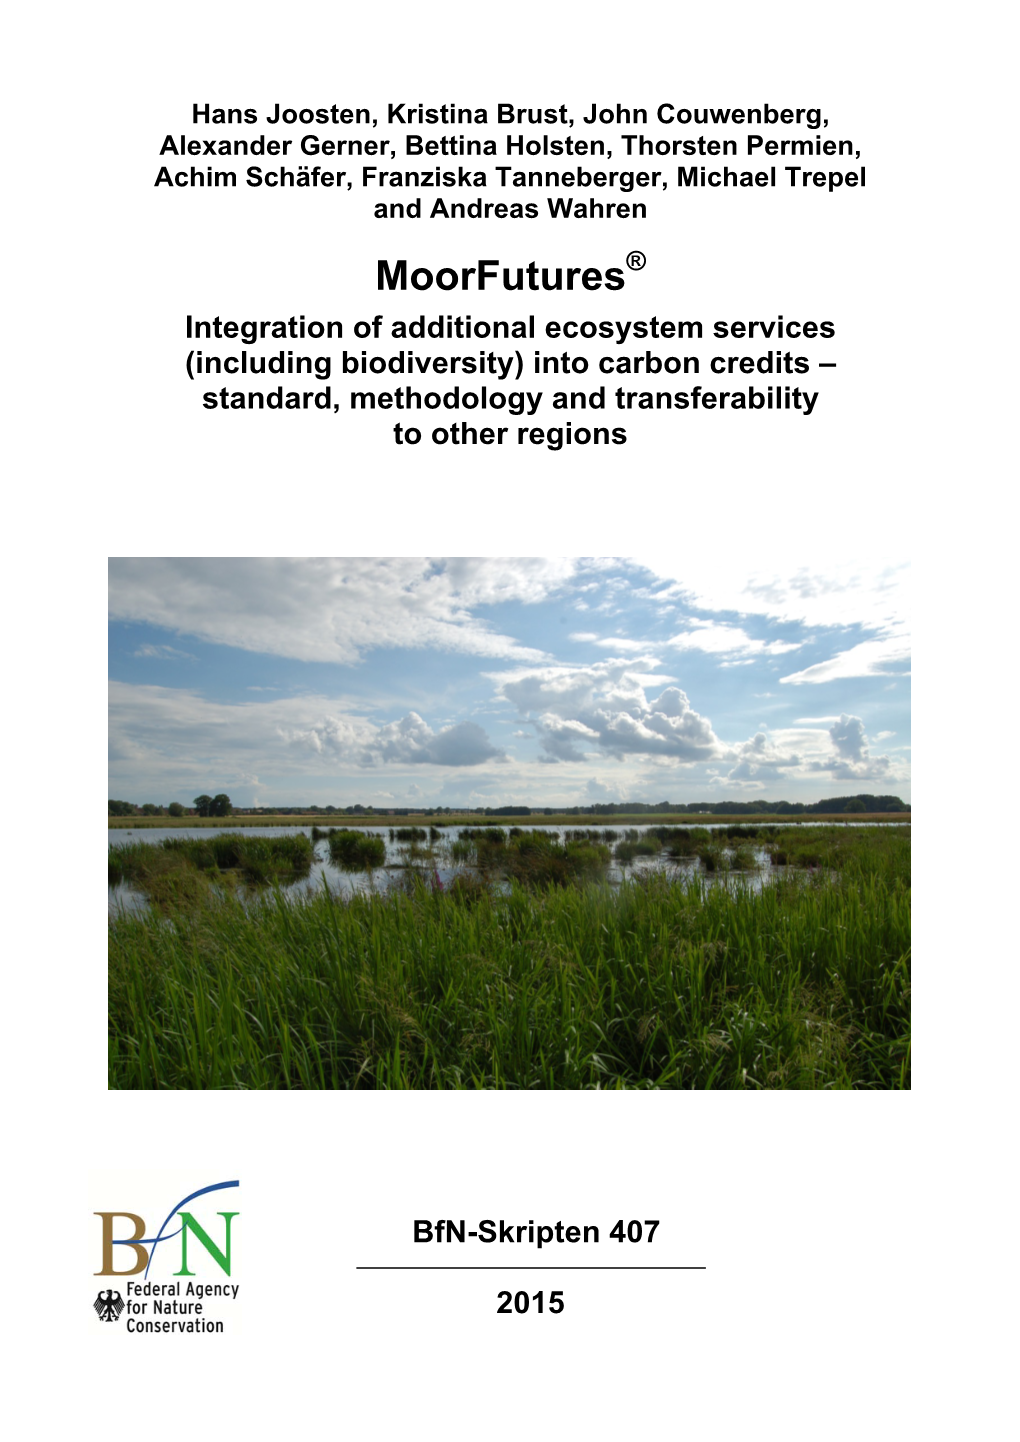 Moorfutures: Integration of Additional Ecosystem Services